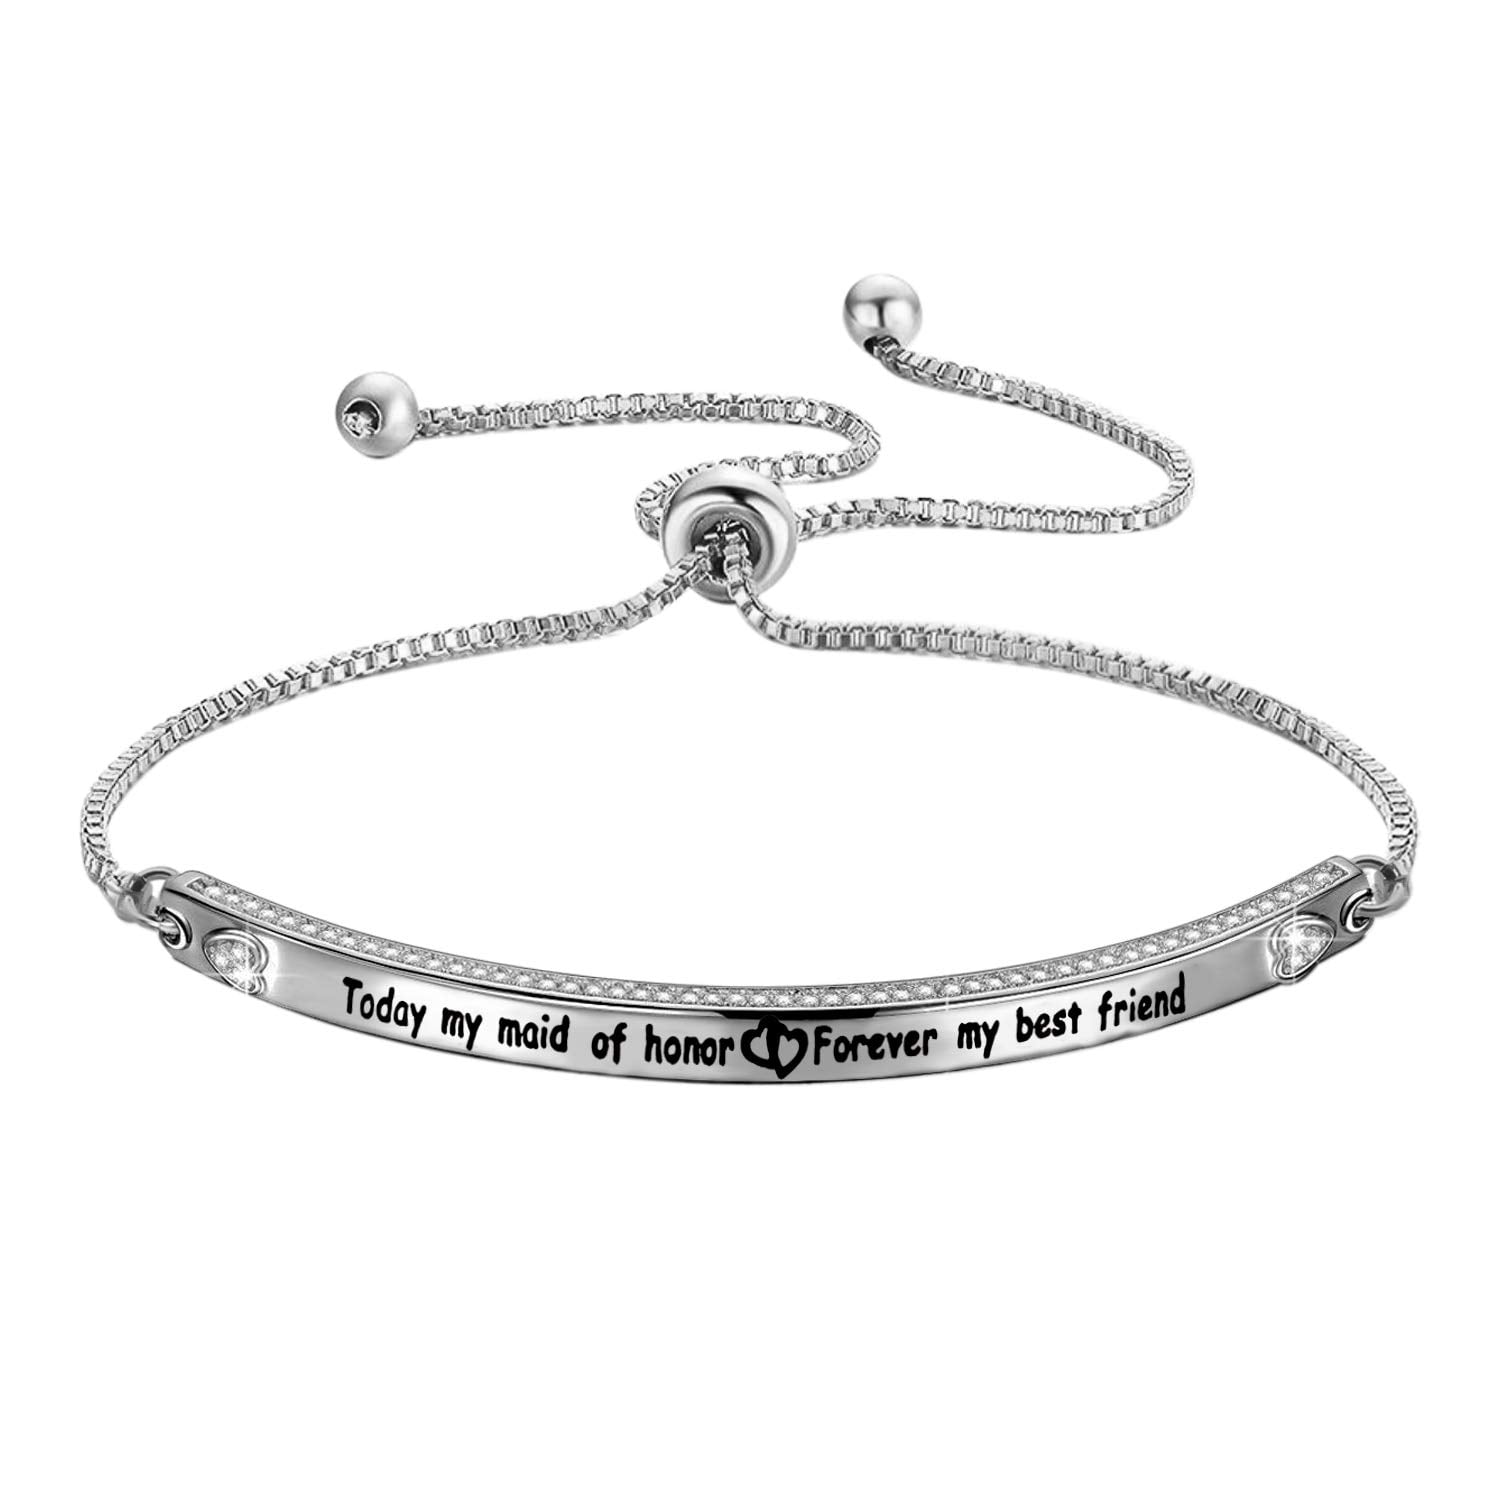 Zuo Bao Maid of Honor Bracelet Today My Maid of Honor Forever My Best Friends Bridesmaid Jewelry Maid of Honor Proposal Gift 